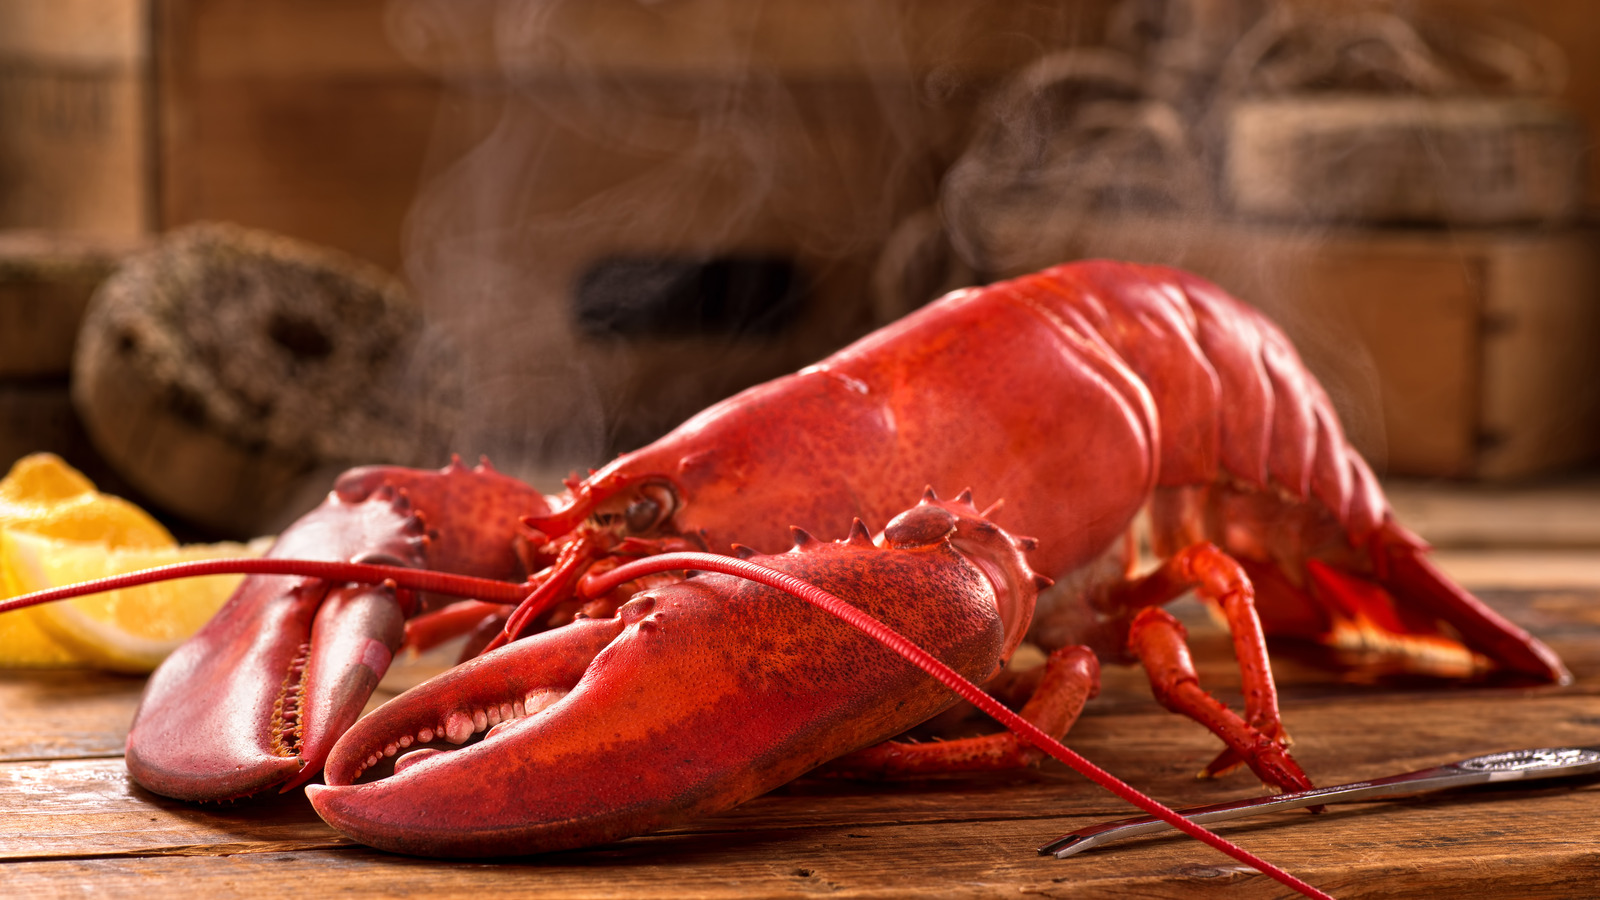 https://www.thedailymeal.com/img/gallery/the-important-timing-tip-to-remember-for-steaming-a-whole-lobster/l-intro-1702711802.jpg